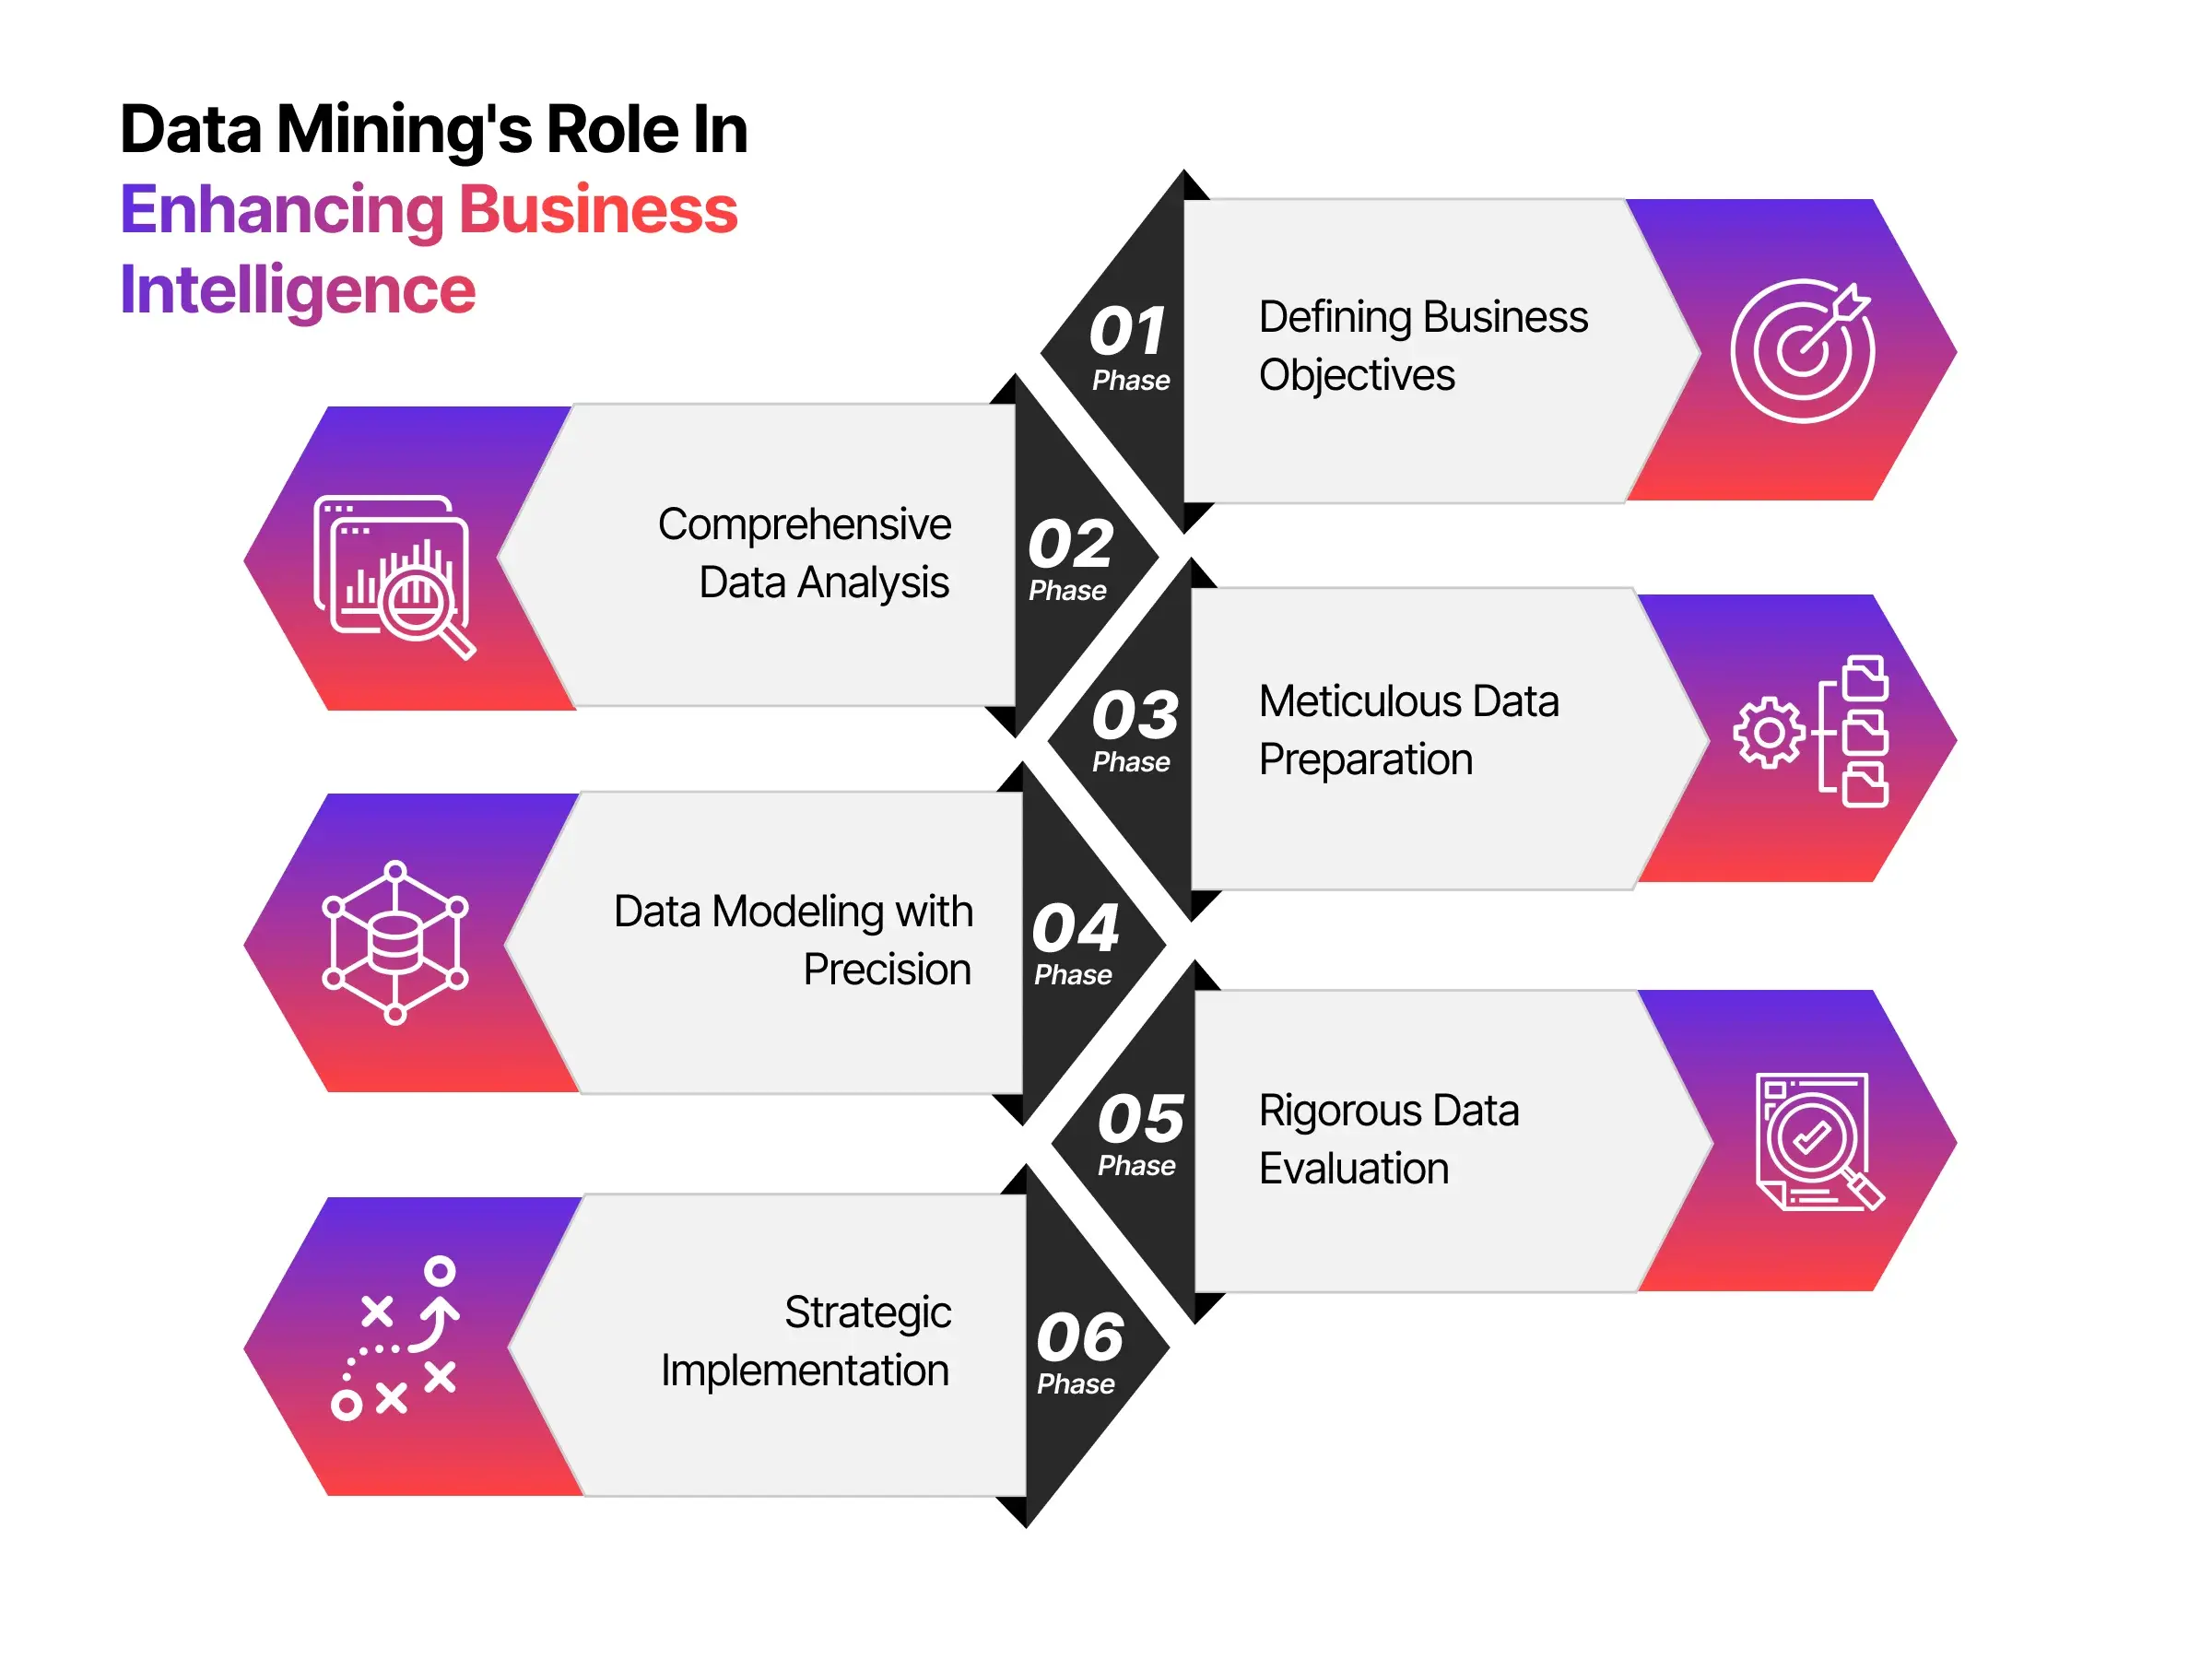 Data Mining's Role in Enhancing Business Intelligence